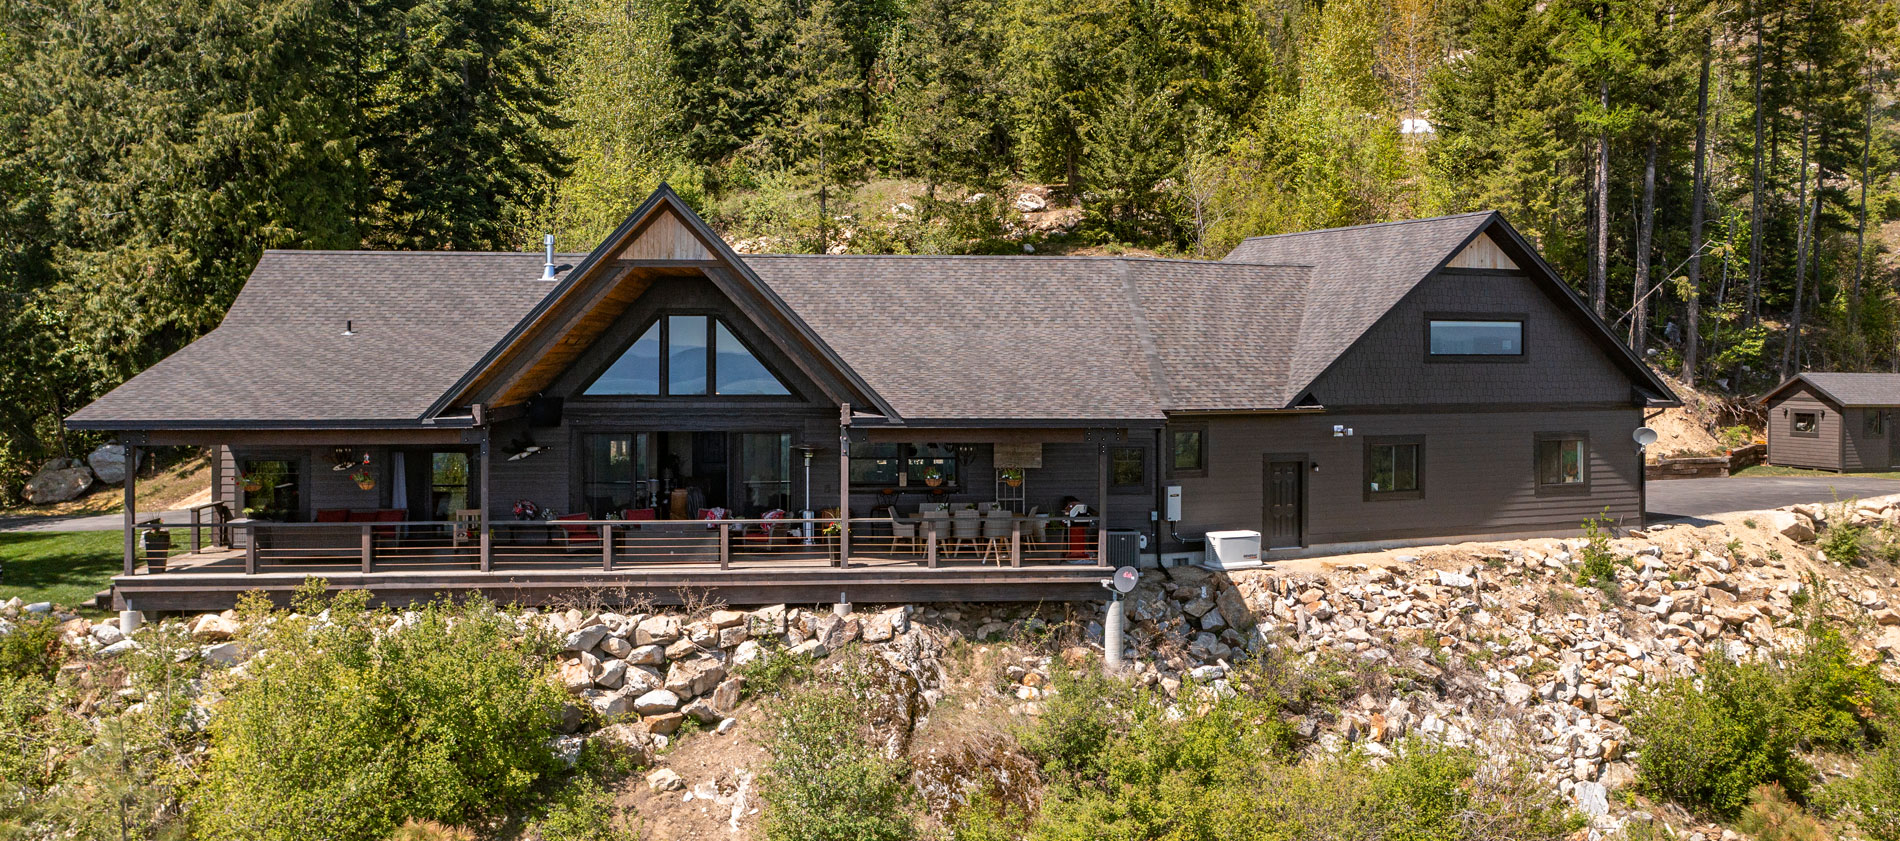 Gorgeous home tucked privately in the trees at the base of Schweitzer Mountain. Meticulously designed and constructed estate property offers unmatched views of Lake Pend Oreille and the Cabinet Mountains